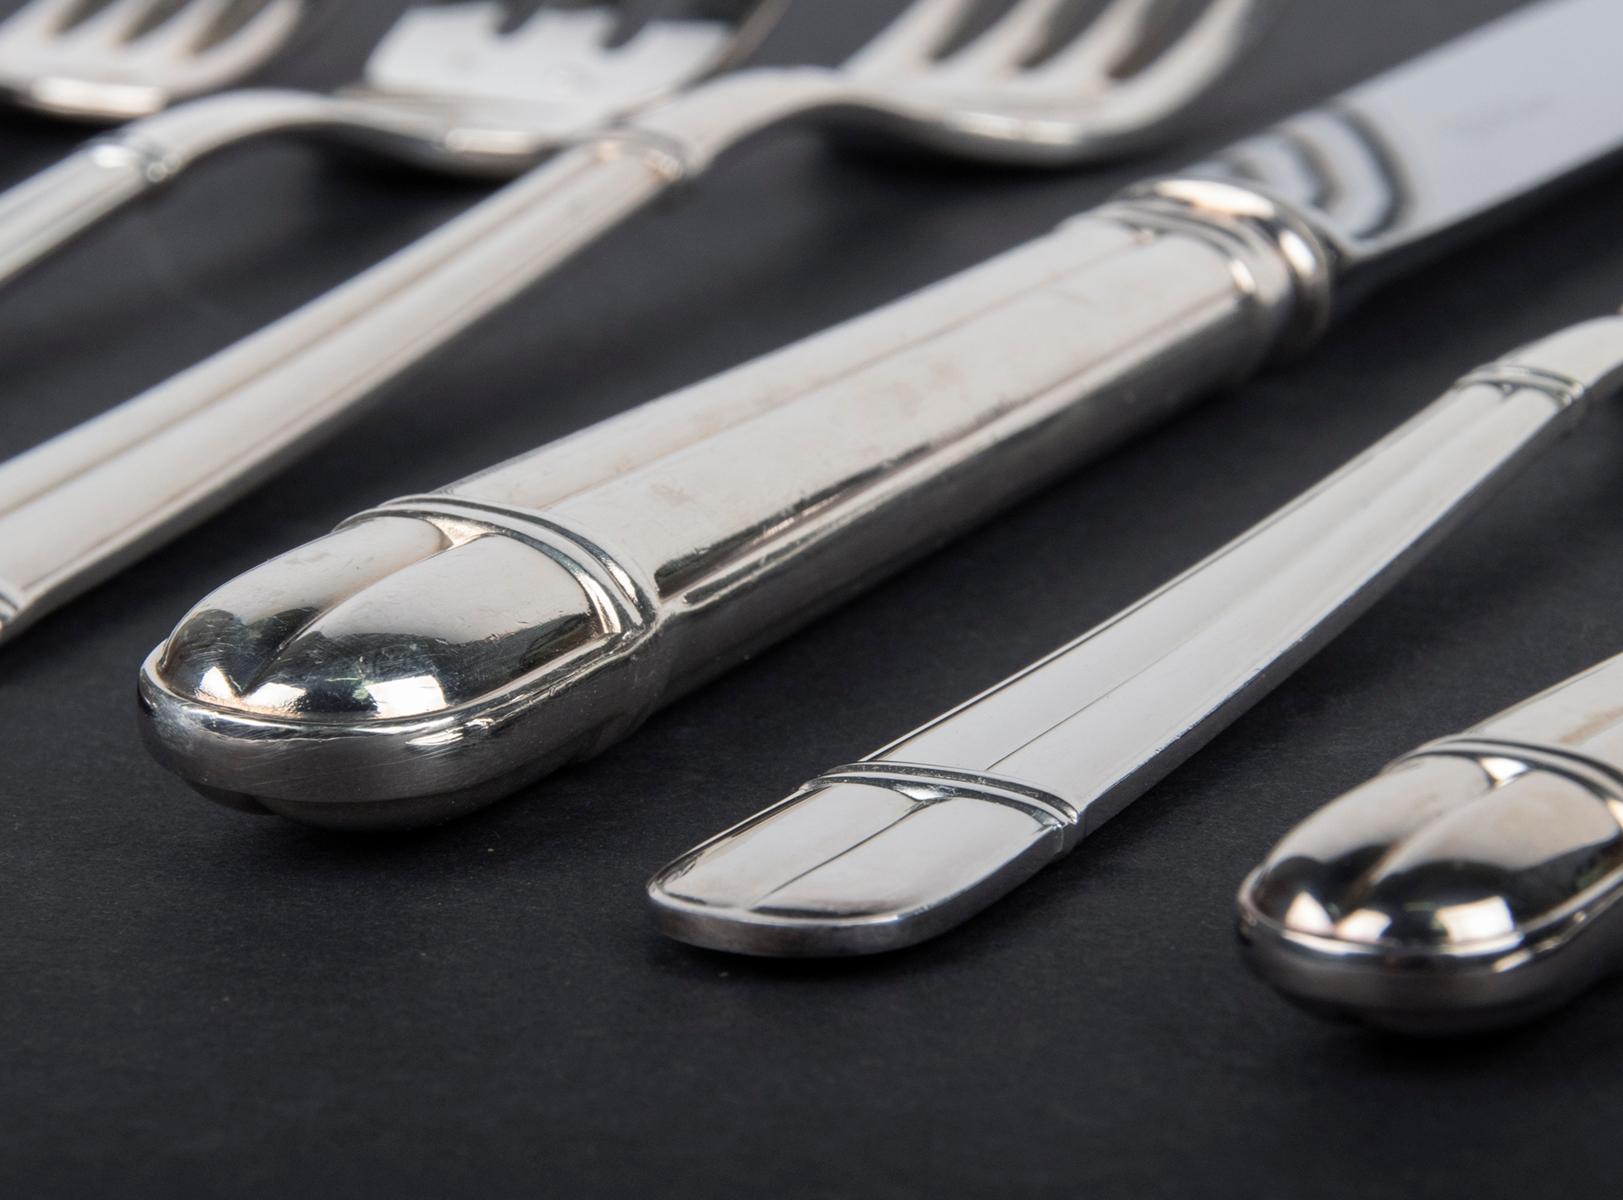 106-Piece Set of Silver Plated Cutlery from Ercuis, France 10